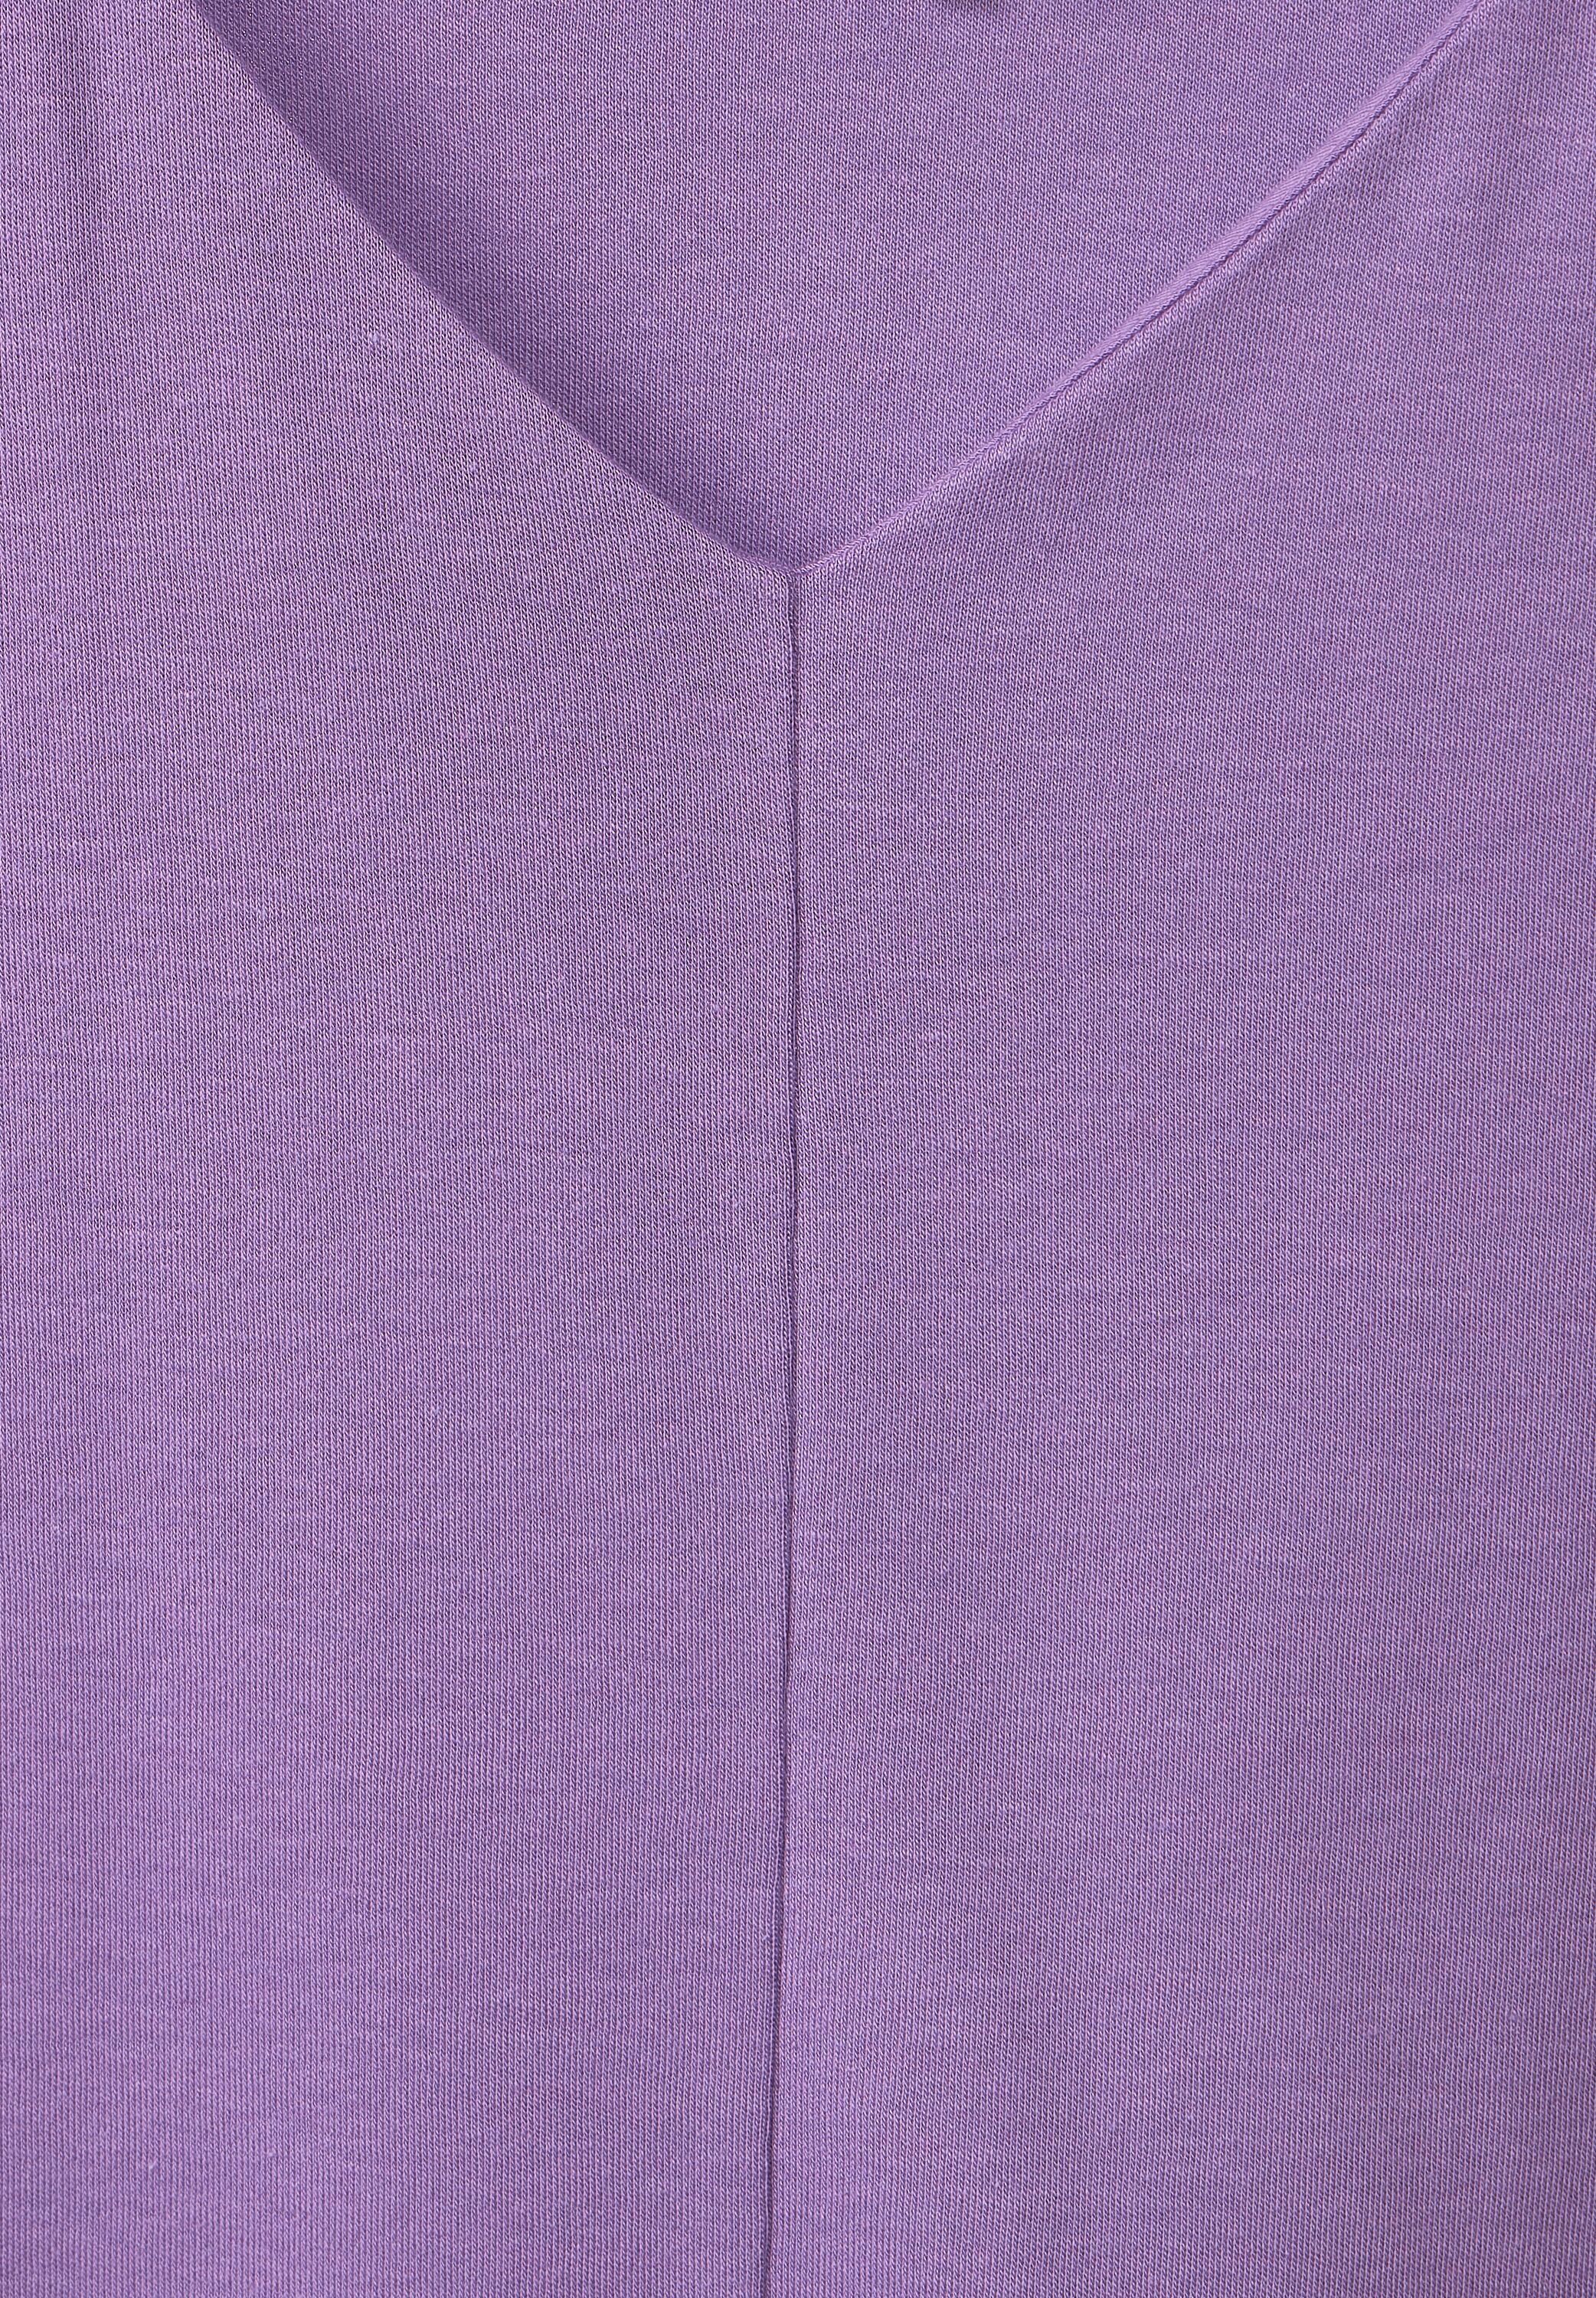 in lupine T-Shirt lilac Unifarbe STREET ONE